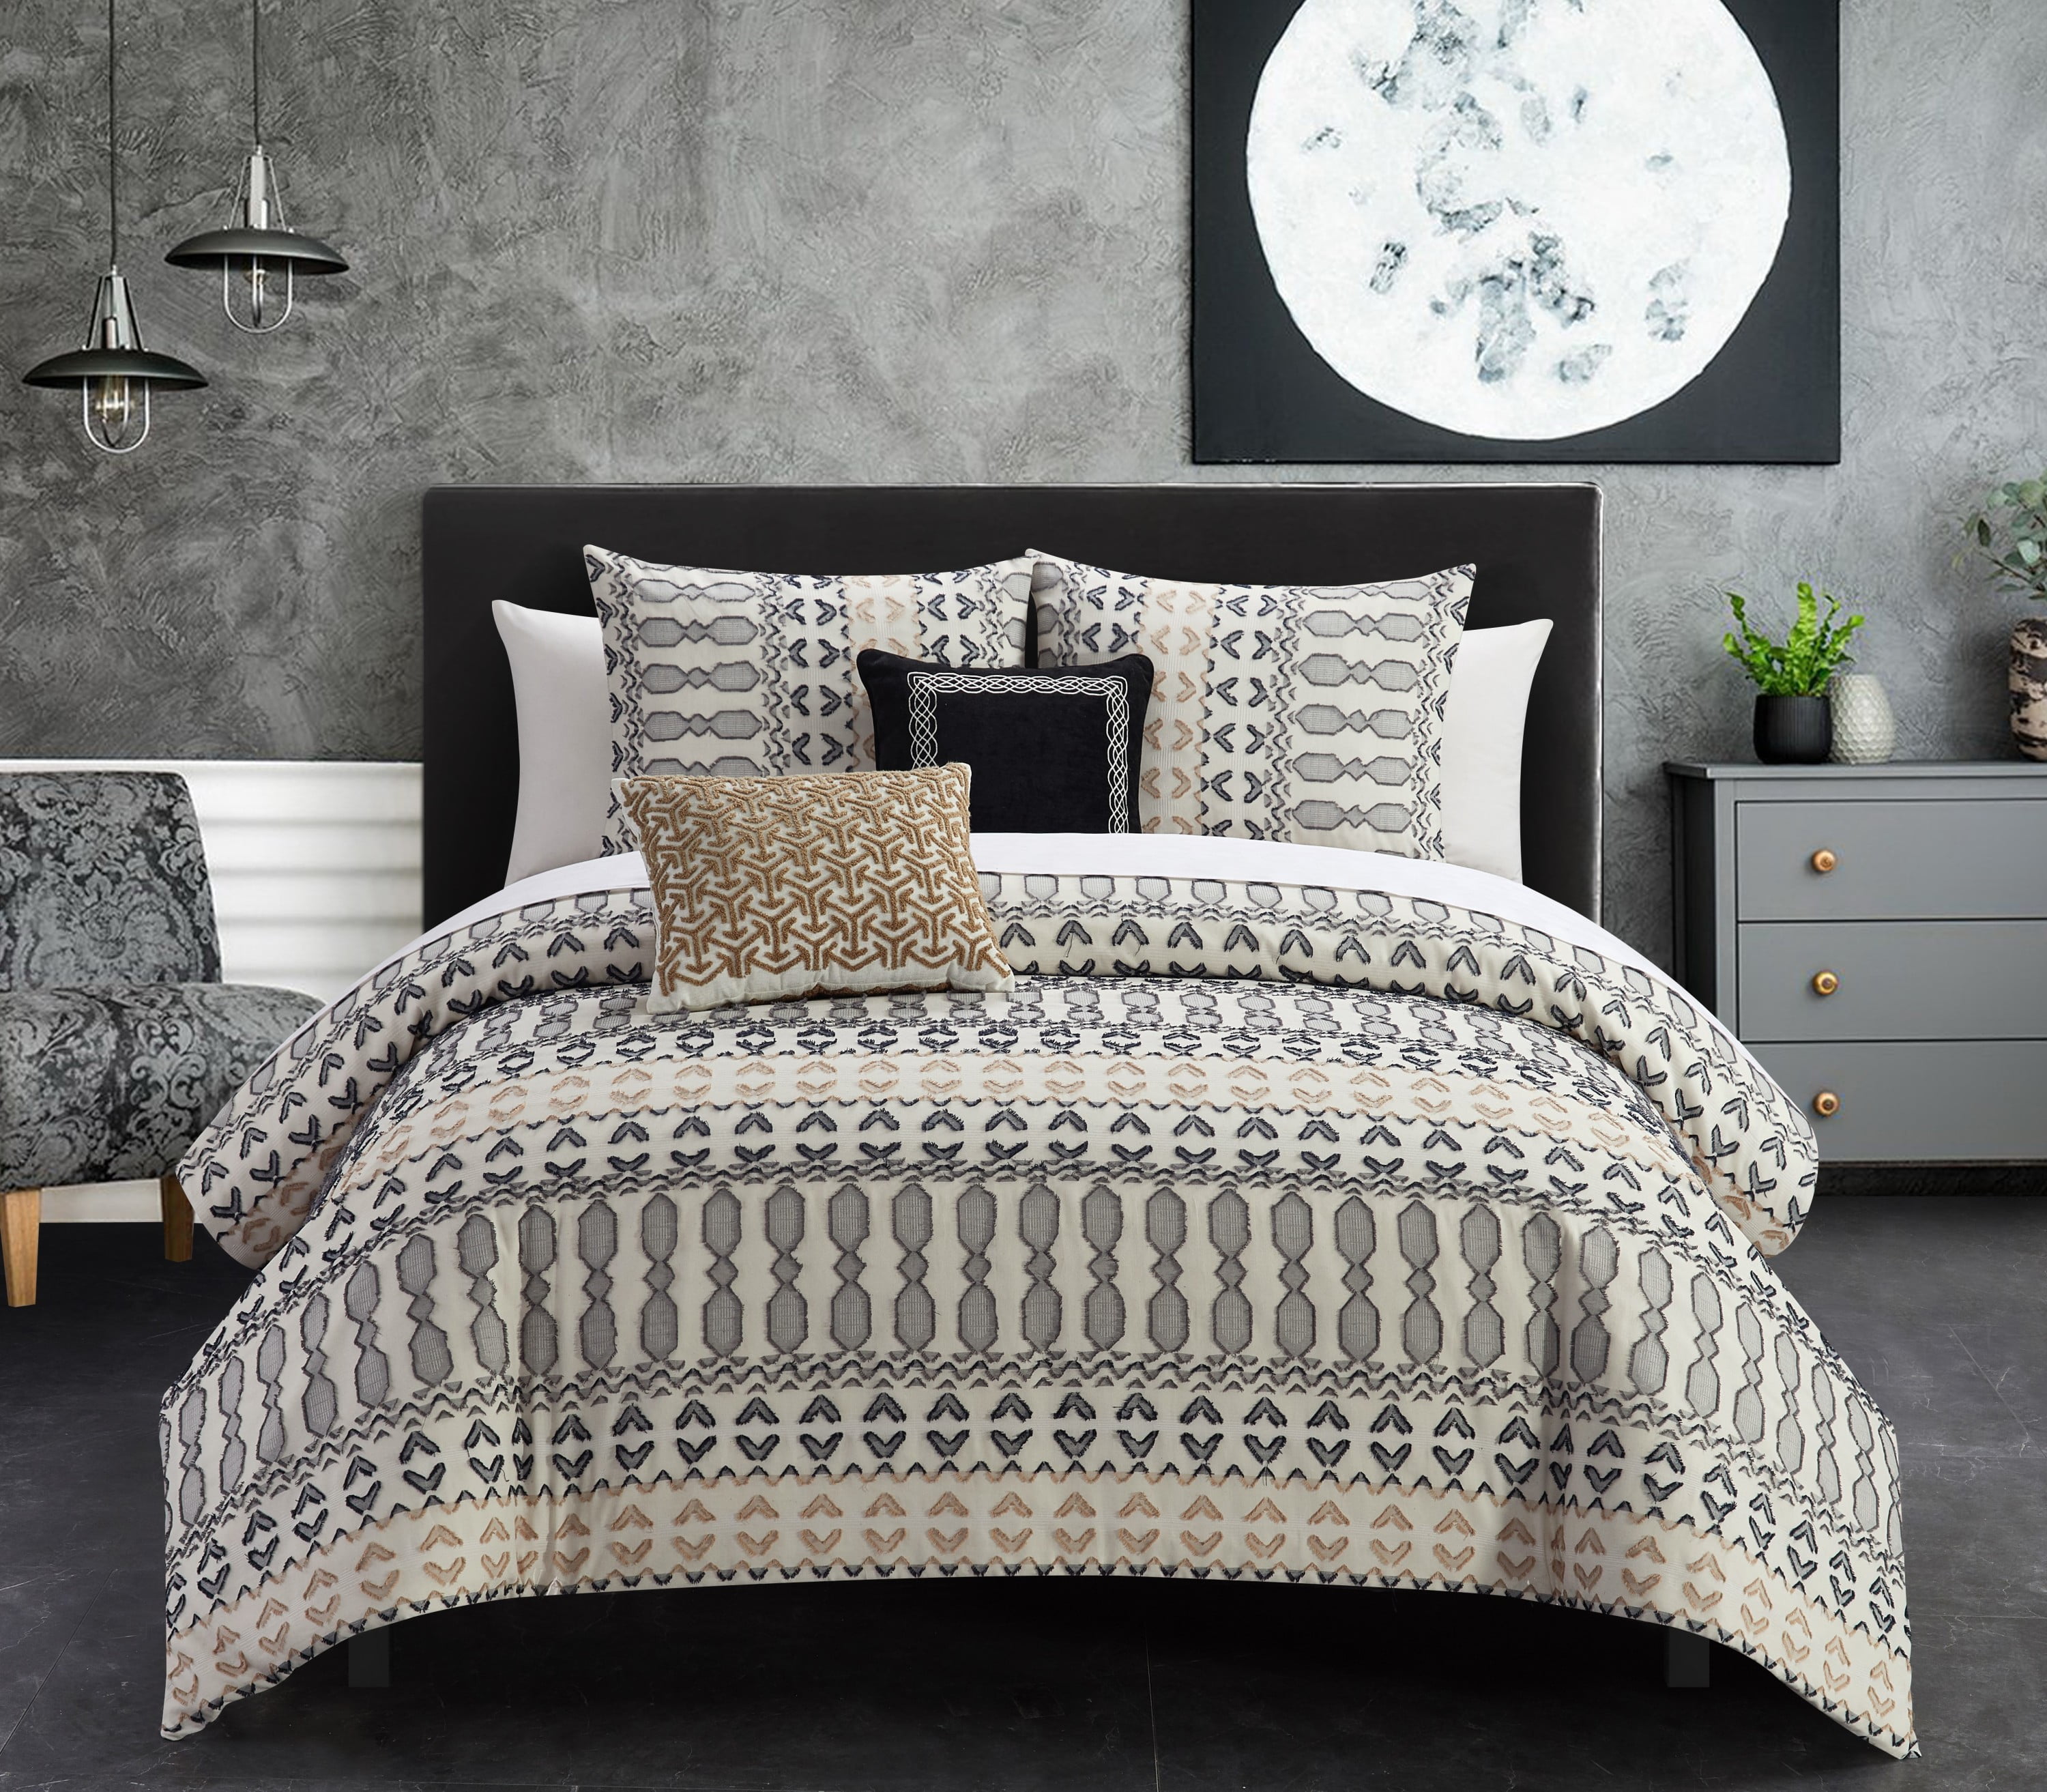 BEAUTIFUL MODERN CHIC BLACK TAUPE BEIGE ART ABSTRACT GREY COMFORTER SET & SHEETS 